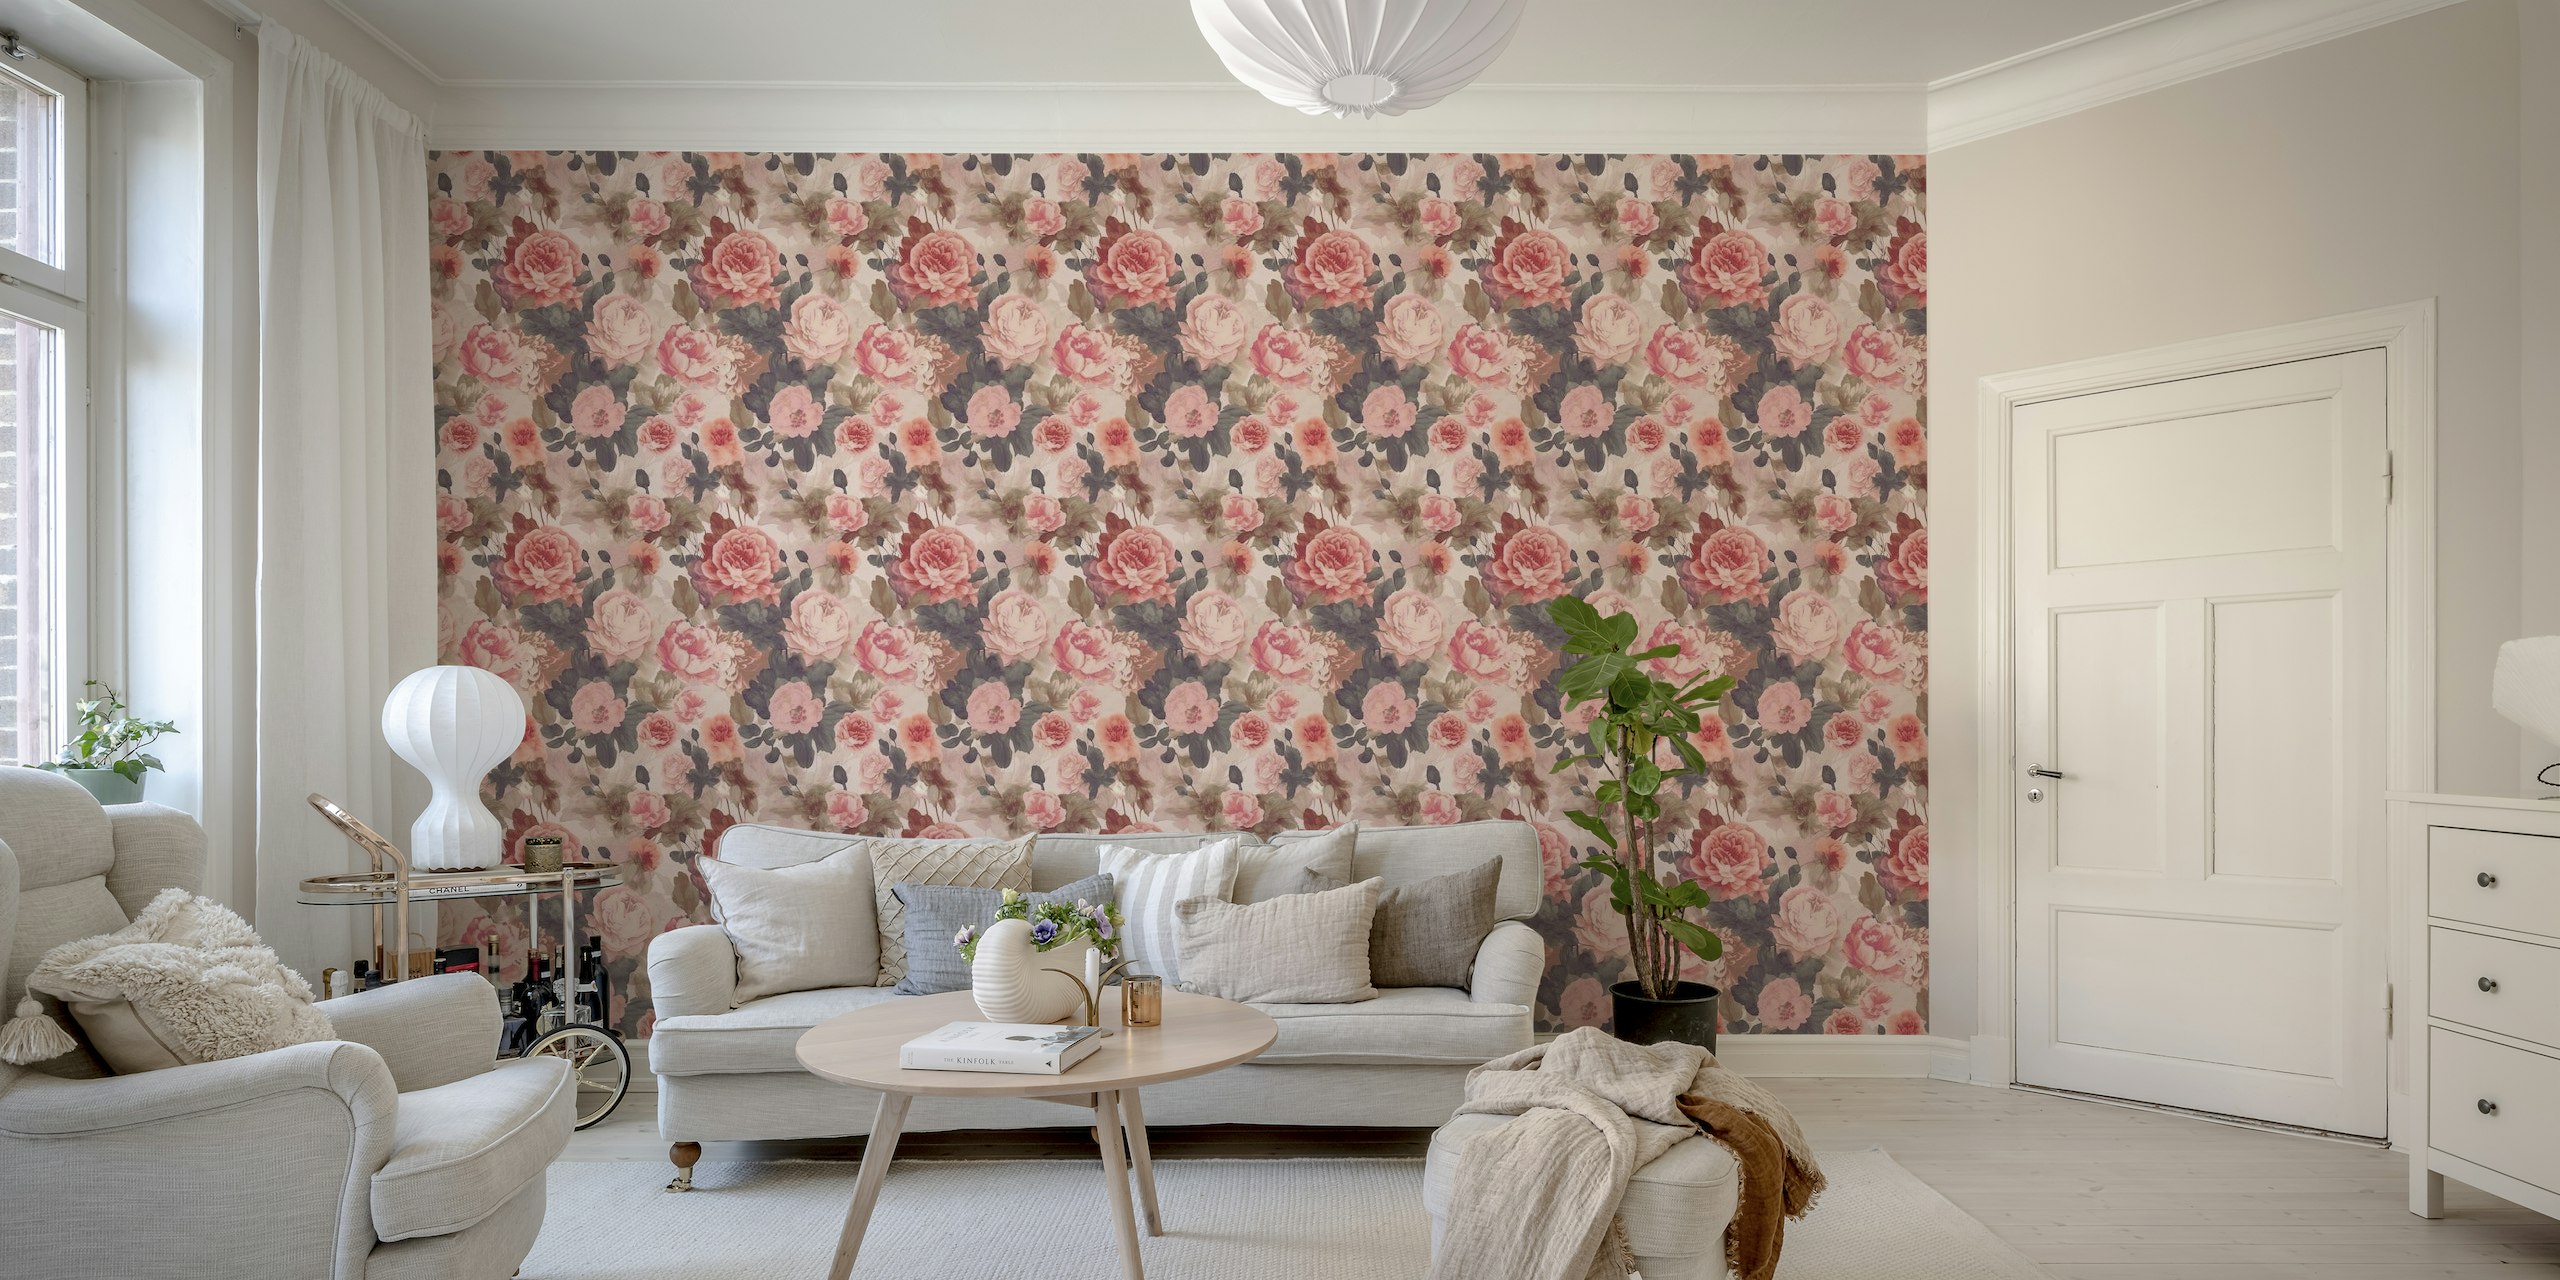 Baroque Roses Floral Nostalgia Design In Moody Pink Colors tapete